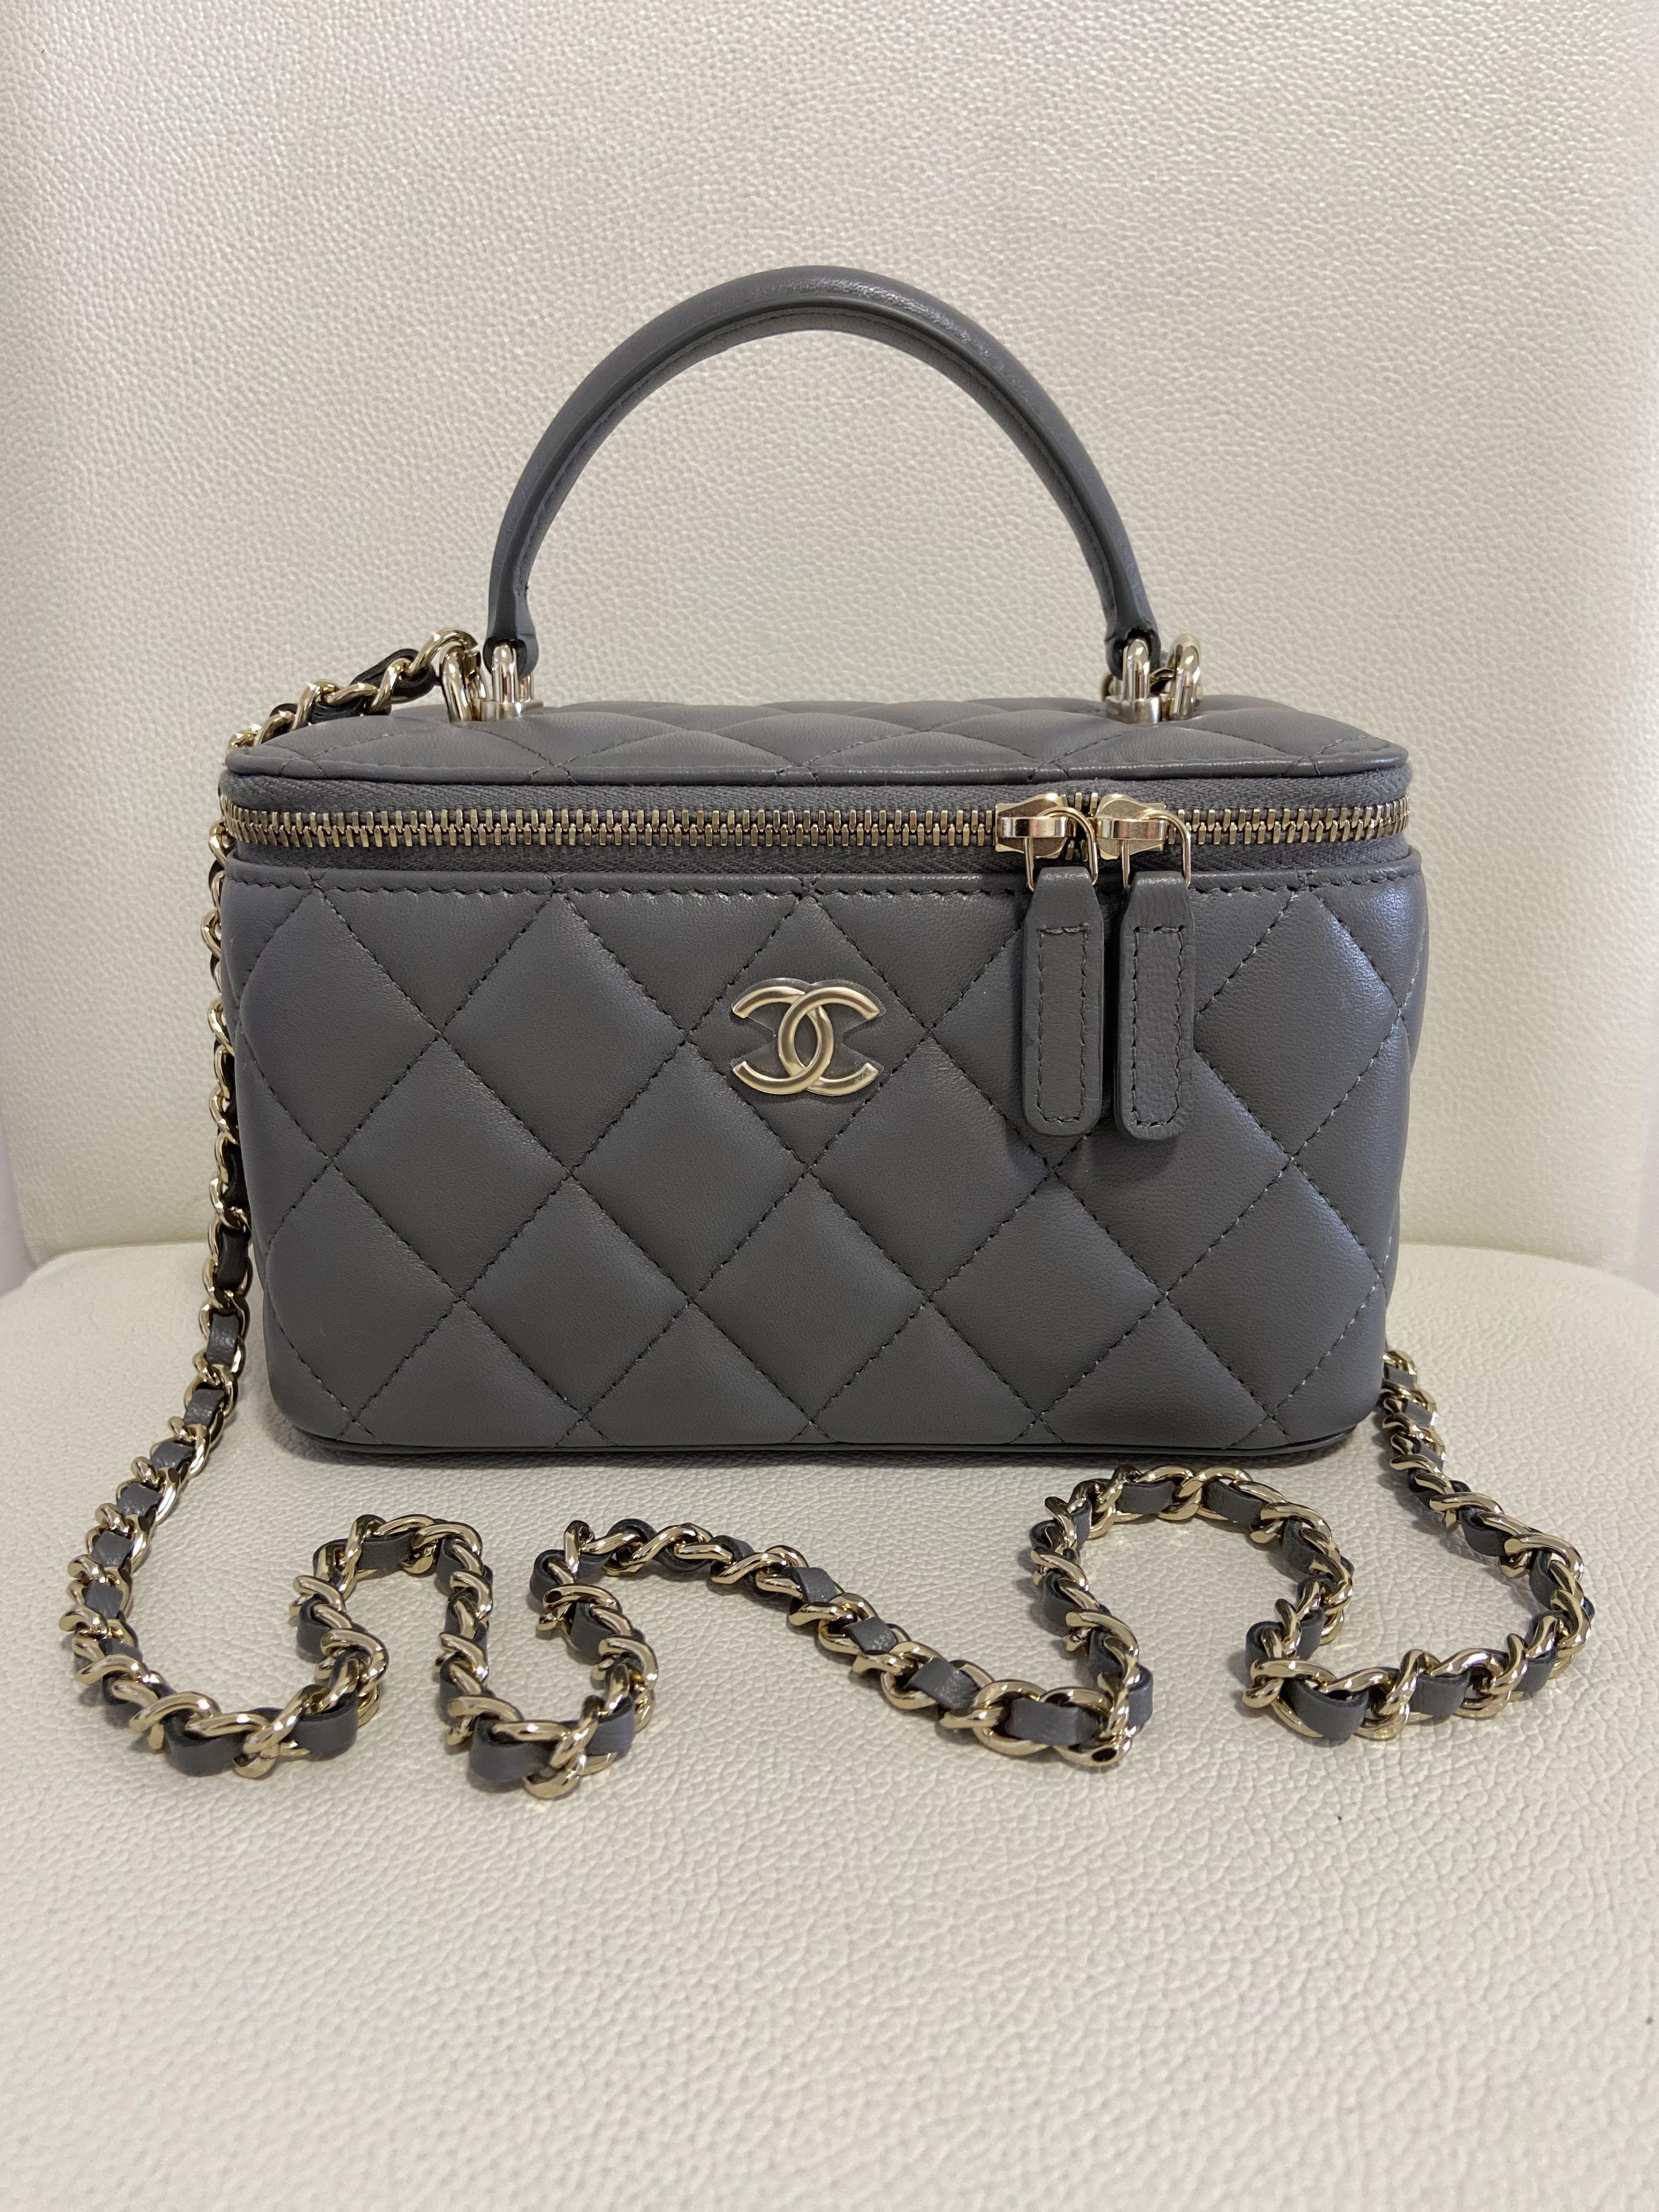 Chanel Vanity Rectangle with Top Handle, 21A Dark Pink Lambskin